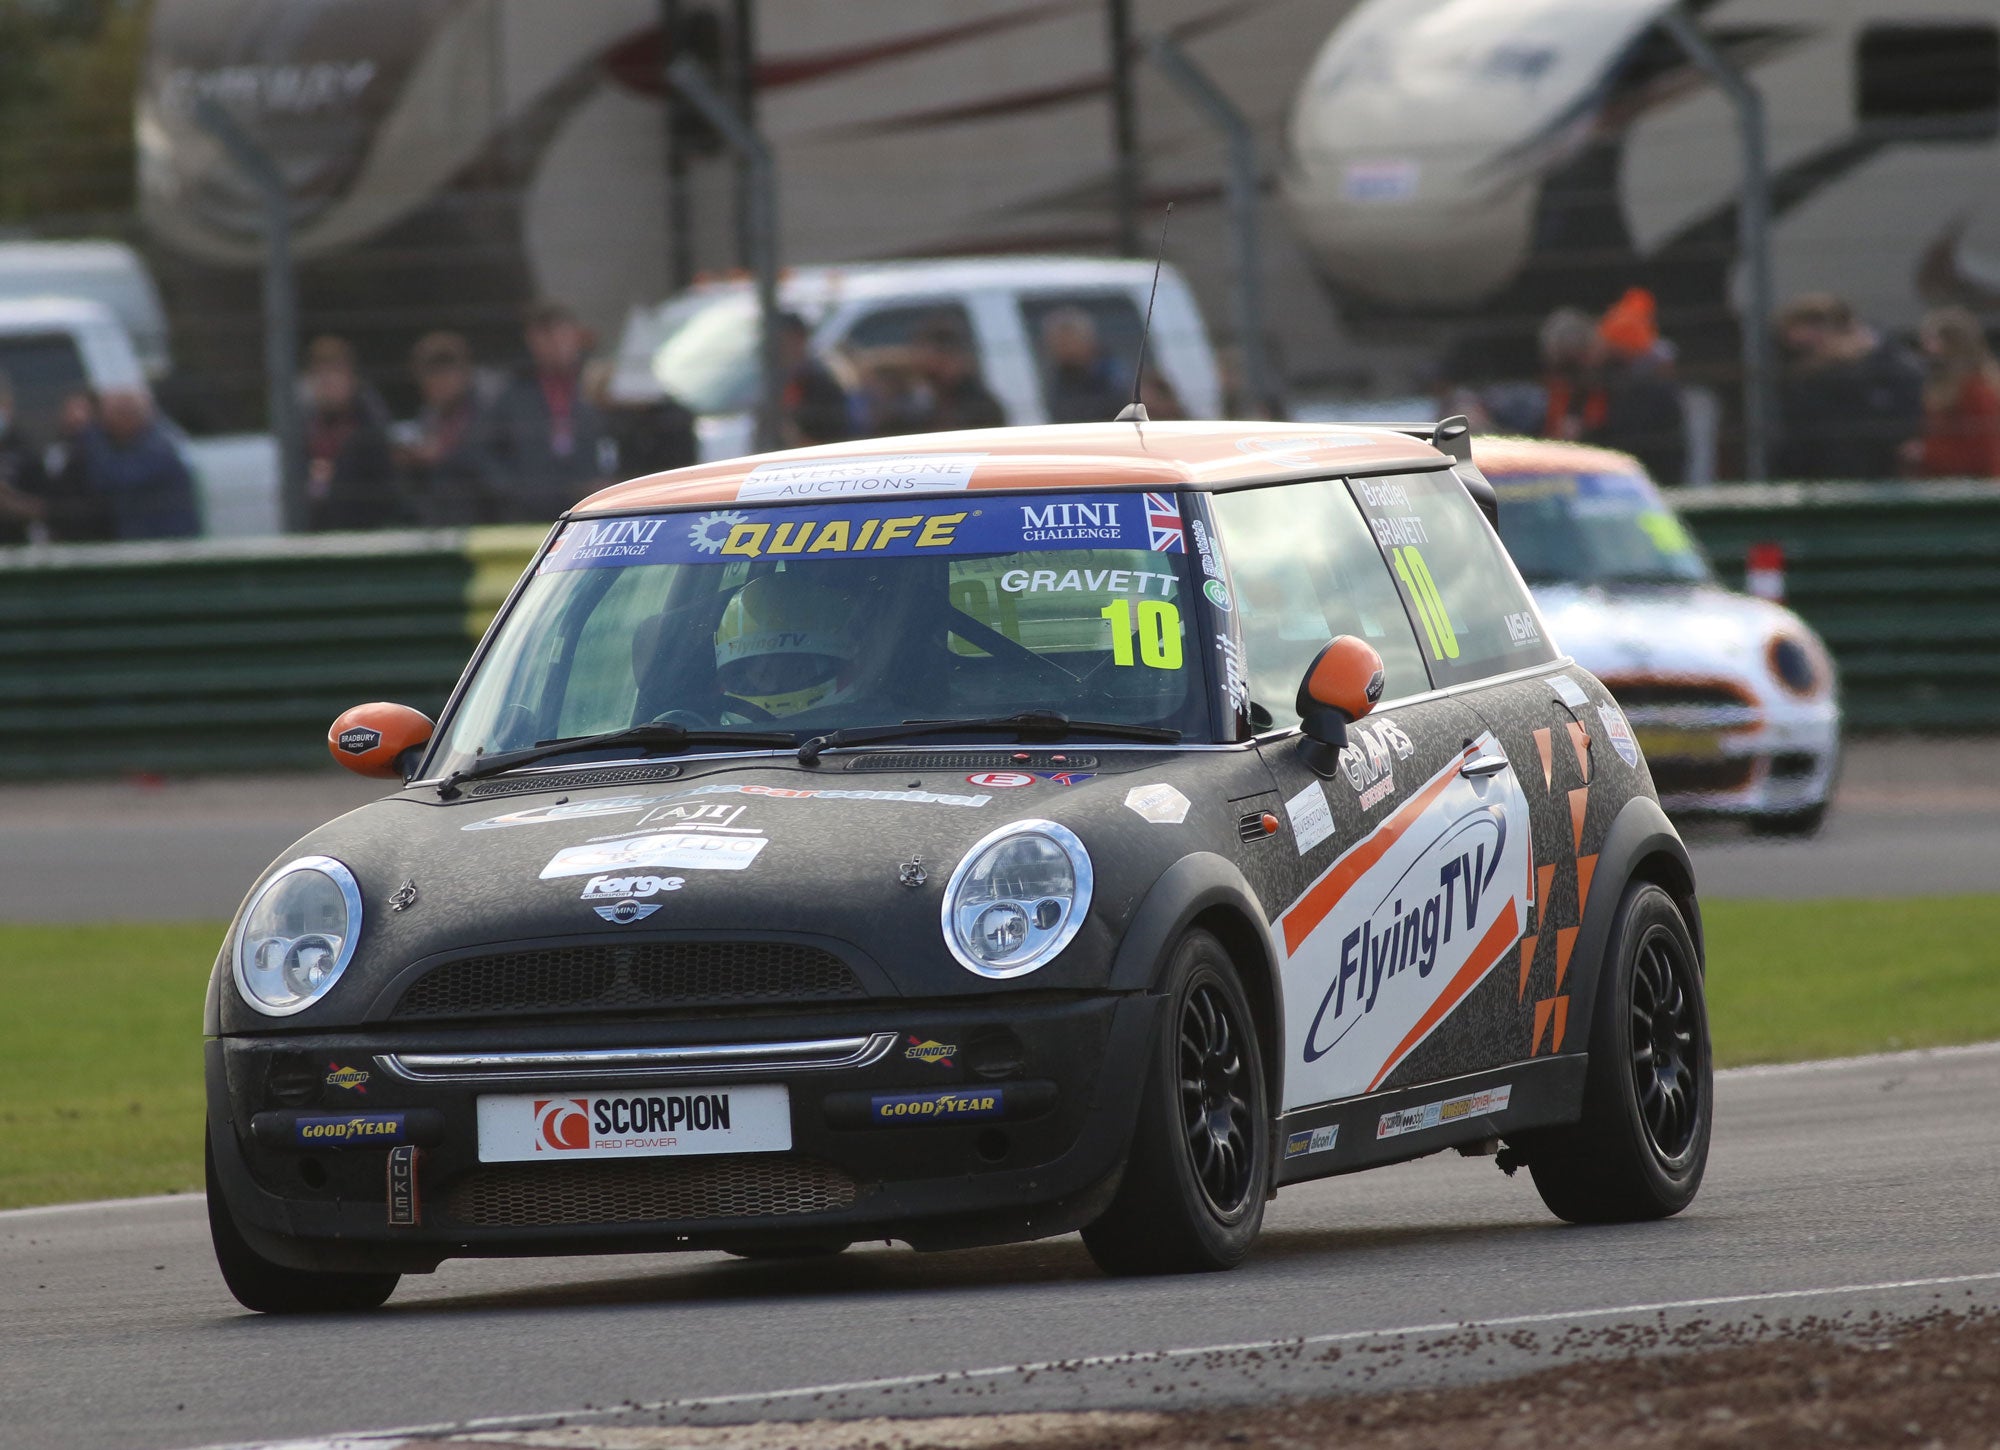 Bradley Gravett son of BTCC British Touring Car Champion Robb Gravett in the Cooper Trophy at Croft in 2020 Through Turn Two into Chicane Graves Motorsport Mini Challenge JCW Cooper Racing Driver LIQUI MOLY LM Performance Thinking it Better